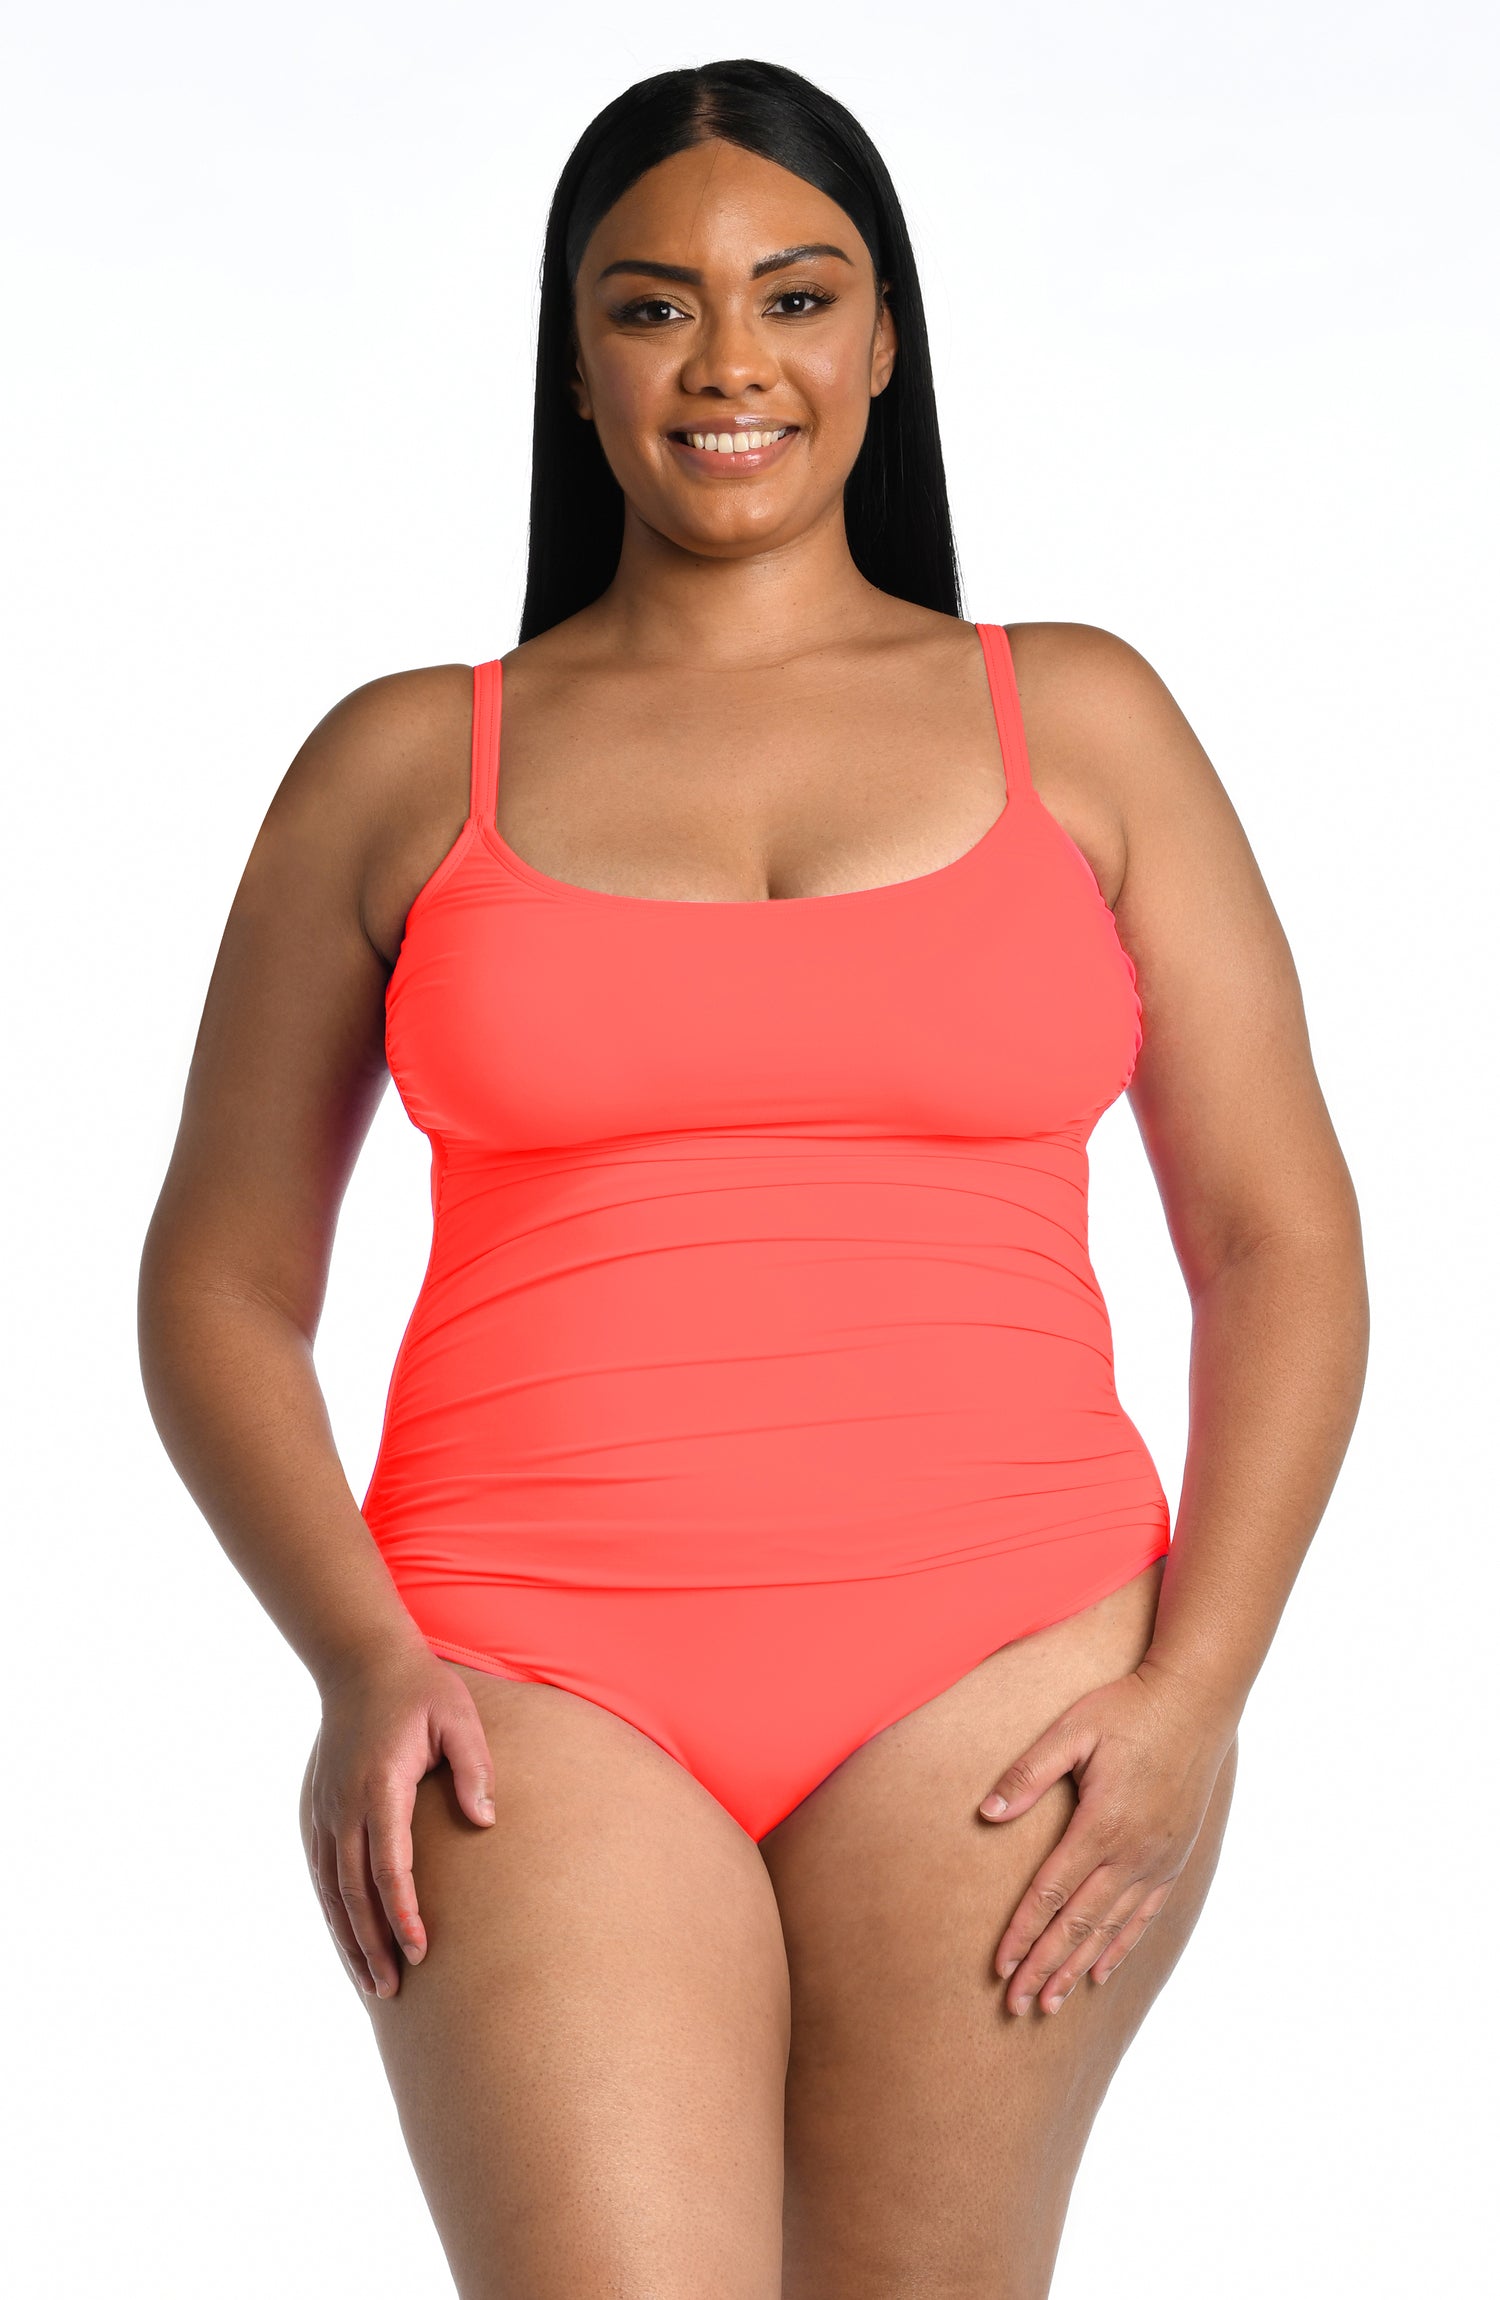 Model is wearing a hot coral colored one piece swimsuit from our Best-Selling Island Goddess collection.